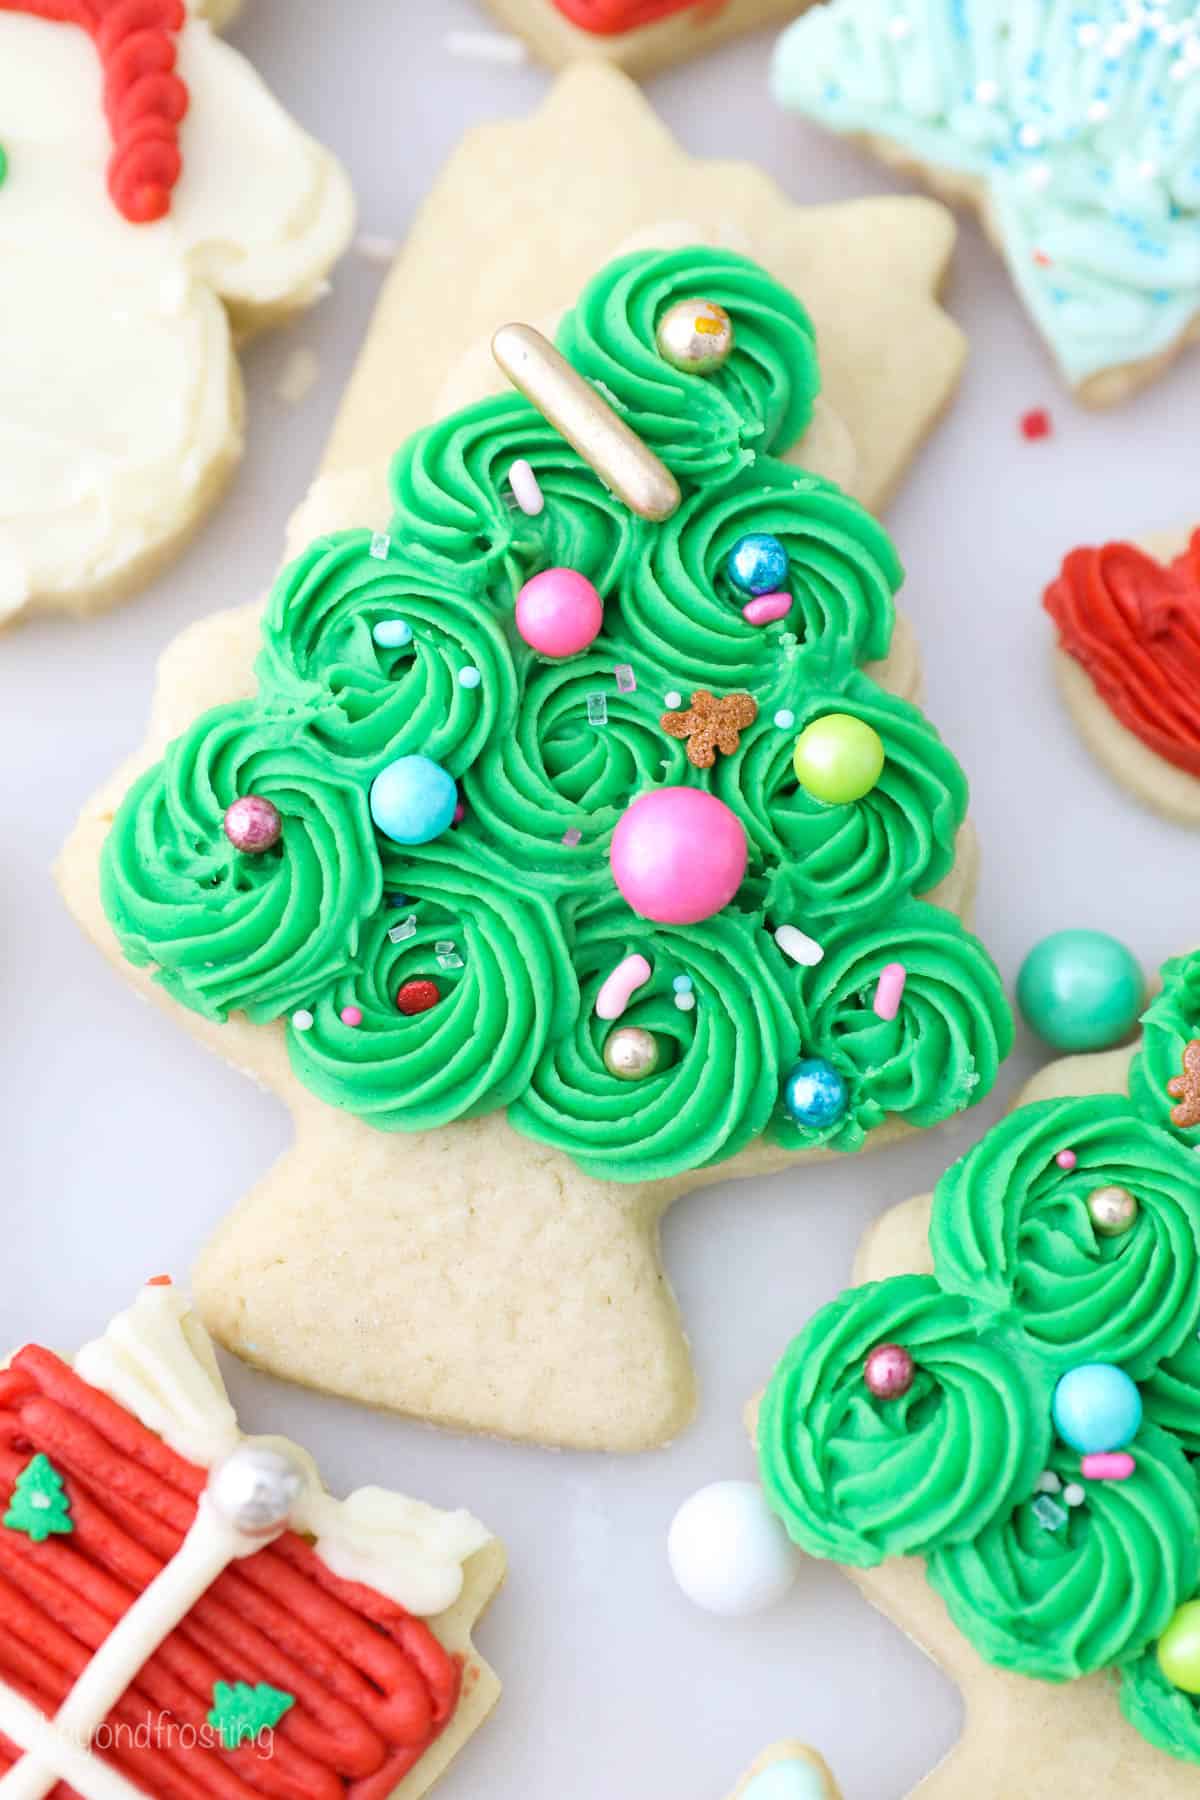 A sugar cookie with buttercream frosting shaped like a christmas tree